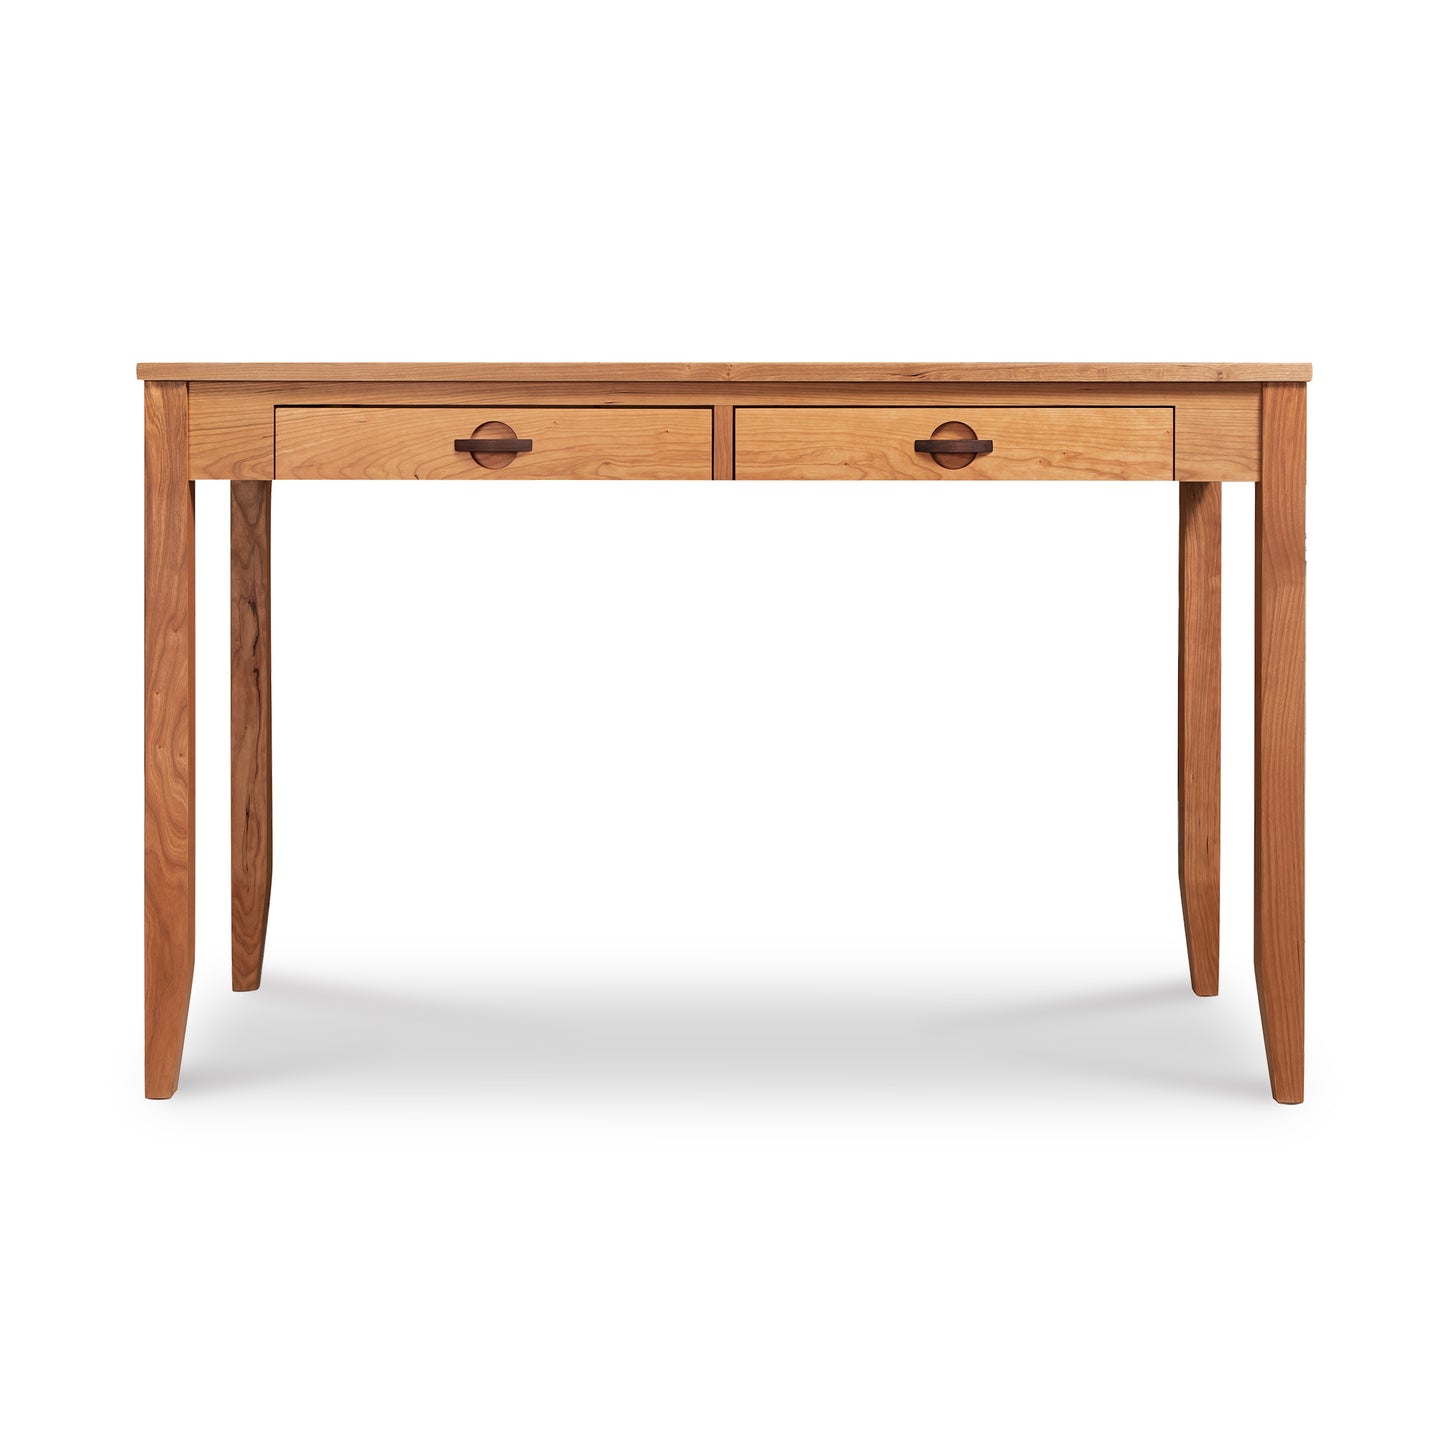 A Ryegate Writing Desk, crafted from eco-friendly materials with two drawers and tapered legs, isolated on a white background by Maple Corner Woodworks.